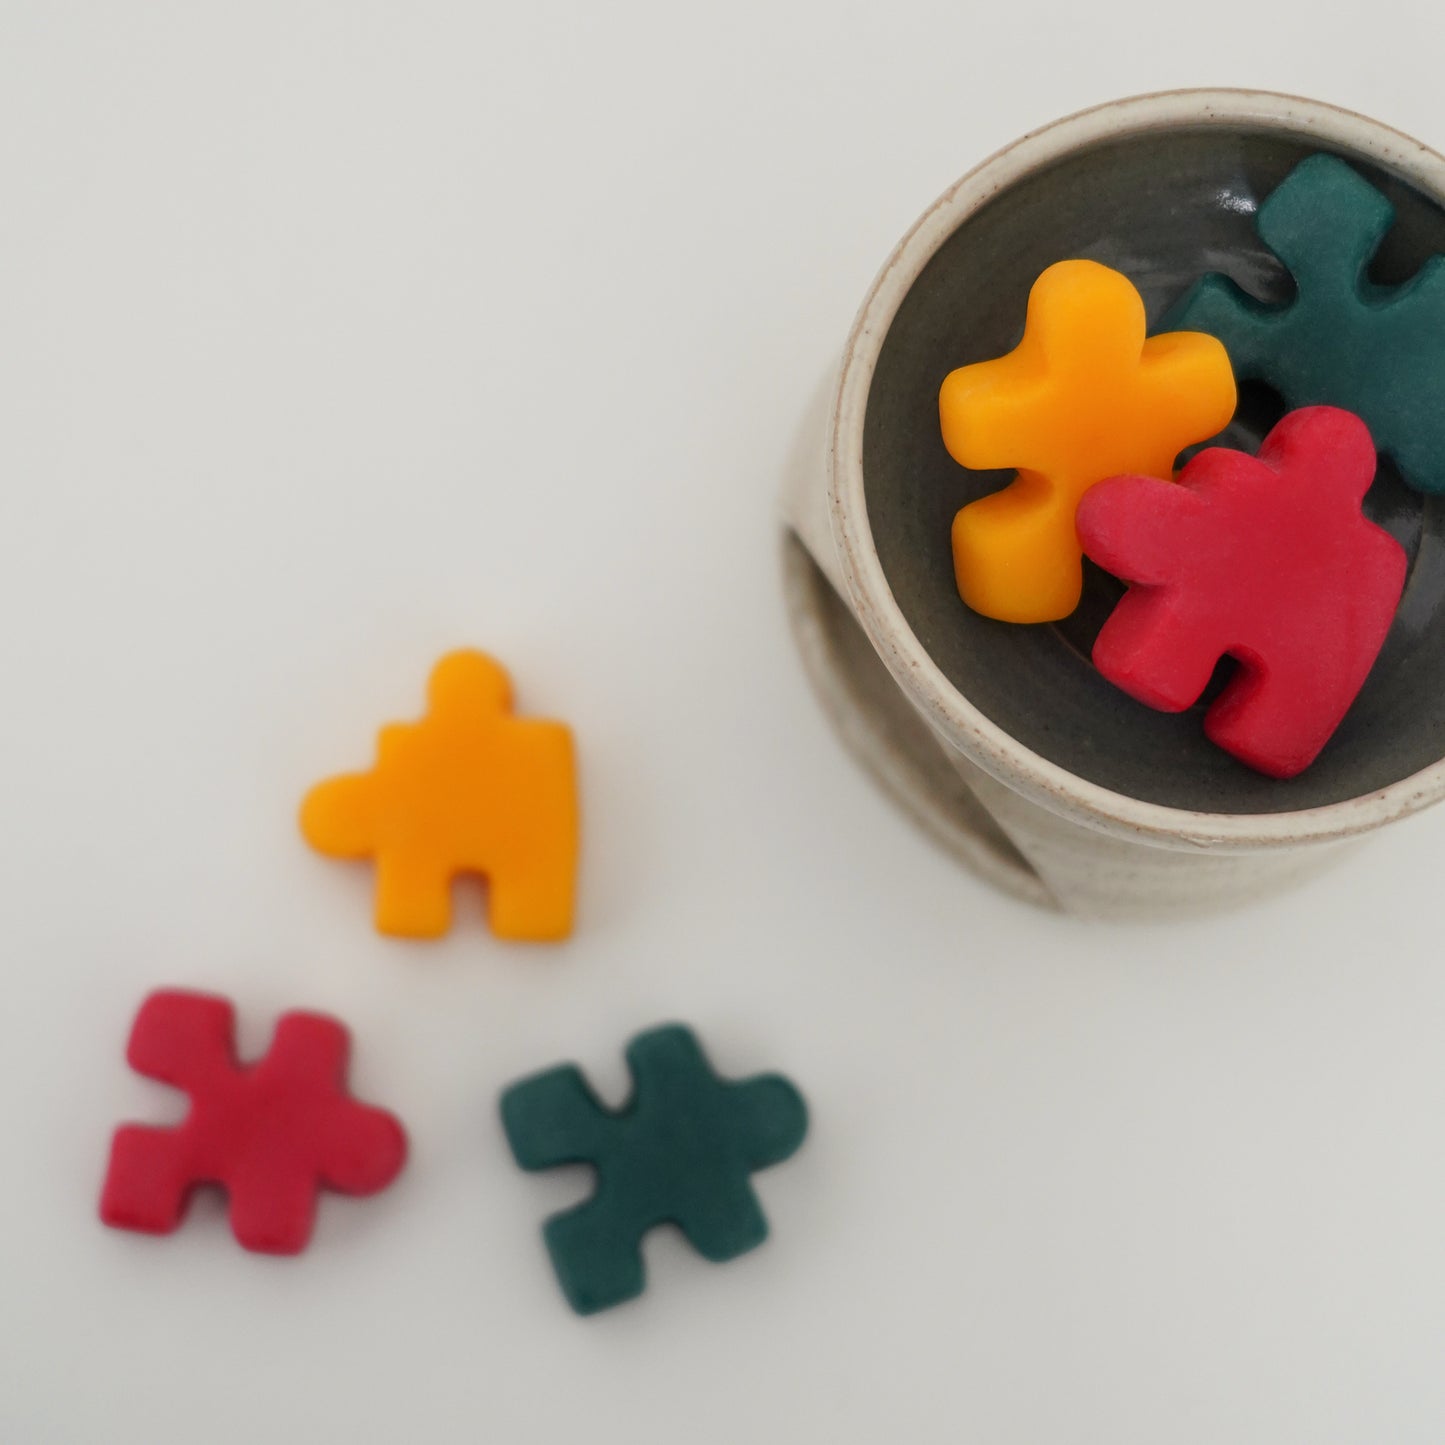 red, yellow, and green puzzle shape wax melts in a wax warmer